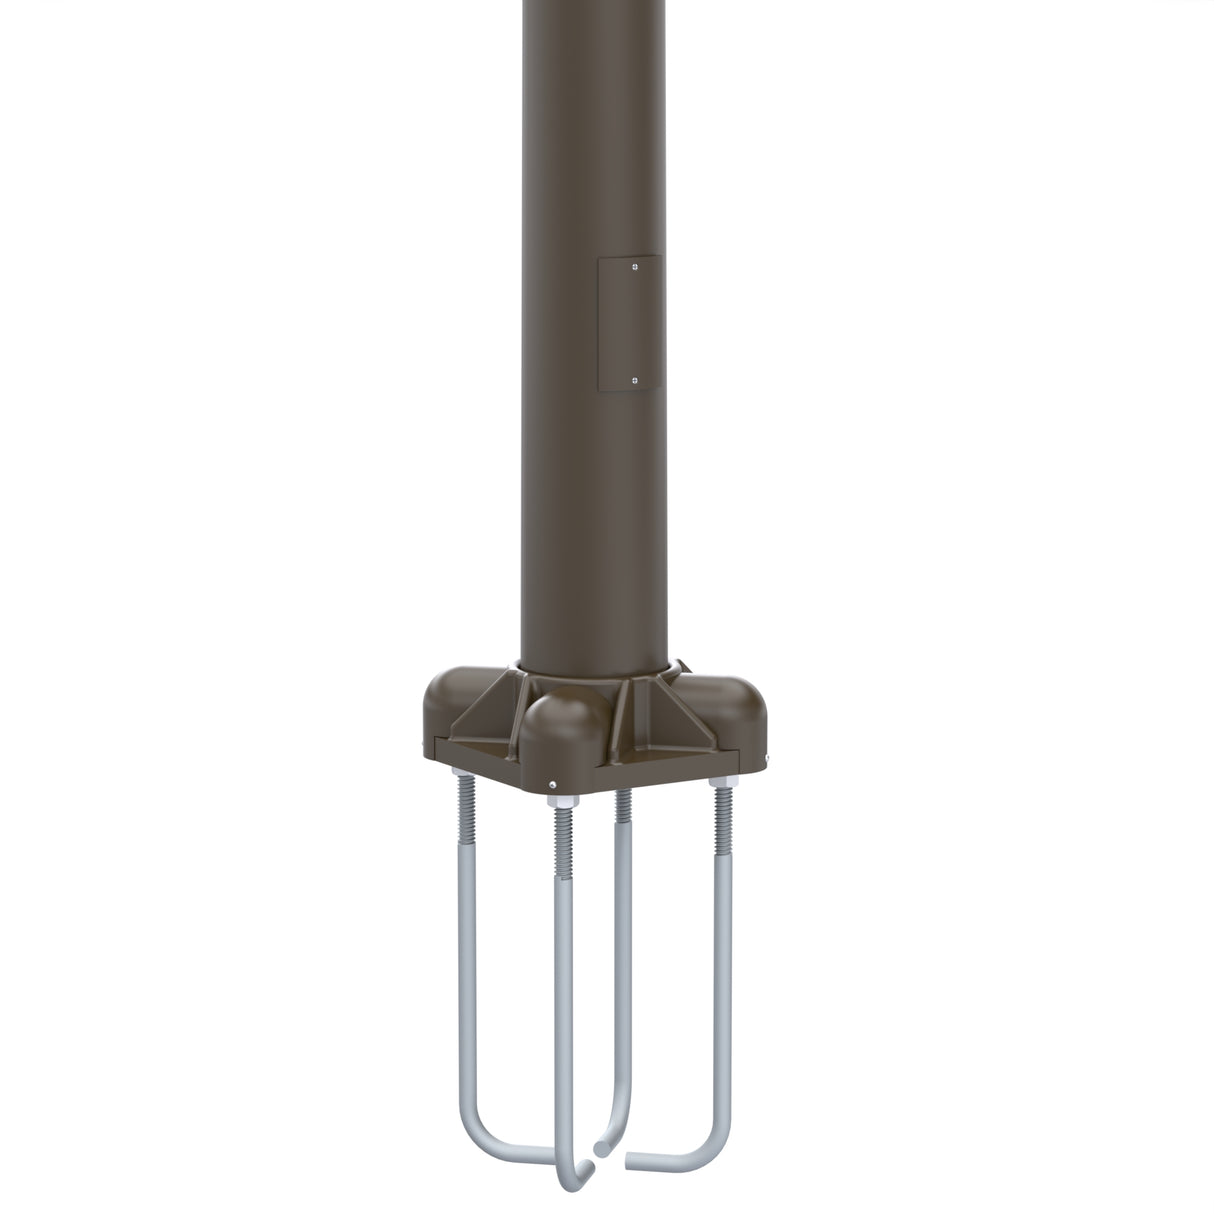 25' Tall x 6.0" Base OD x 4.0" Top OD x 0.156" Thick, Round Tapered Aluminum, Anchor Base Light Pole with 10' Davit Arm